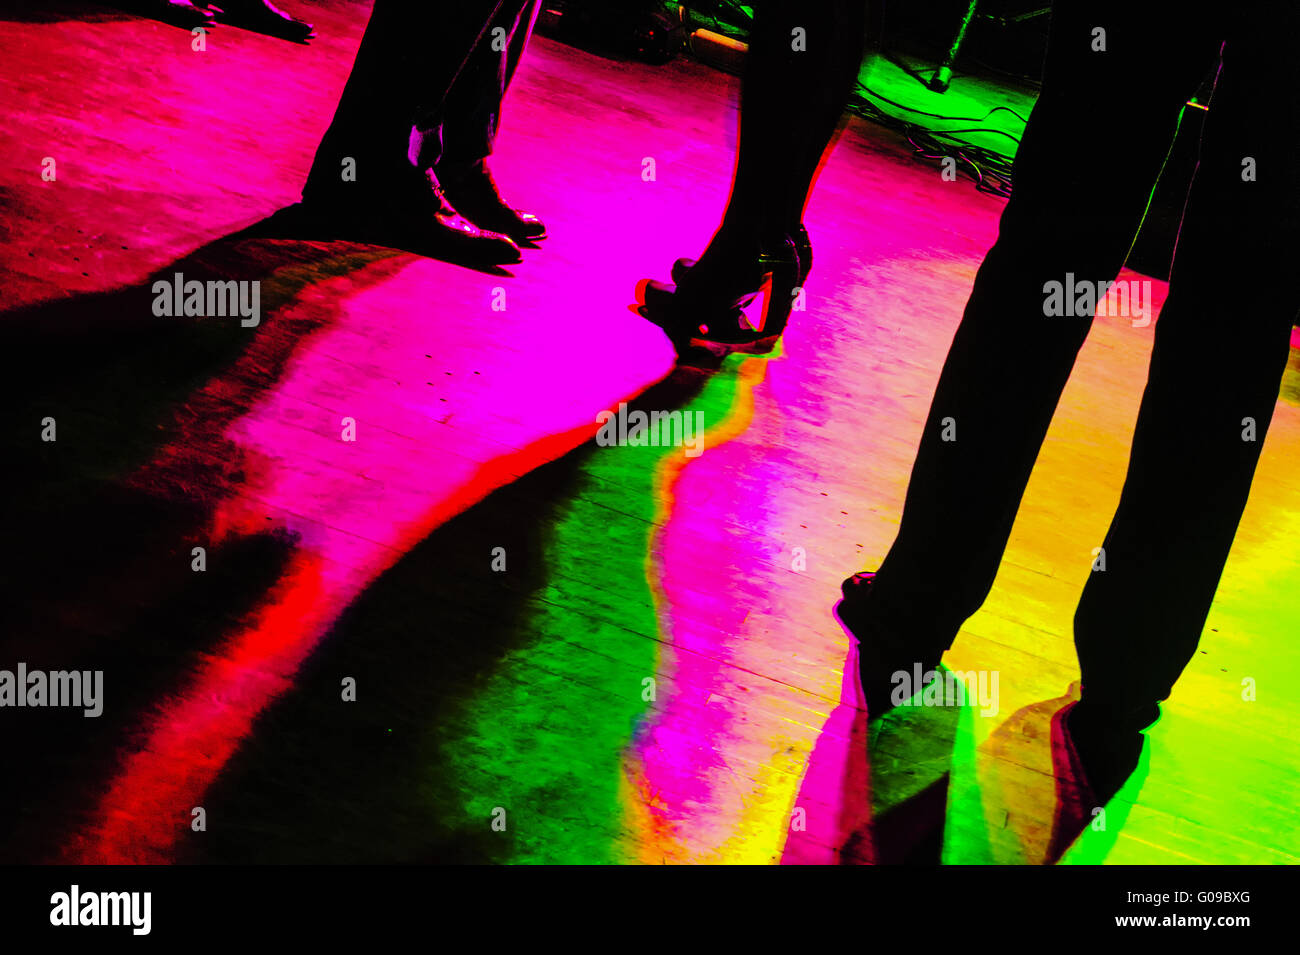 Dance Floor In Bright Colors With Black Silhouette Stock Photo